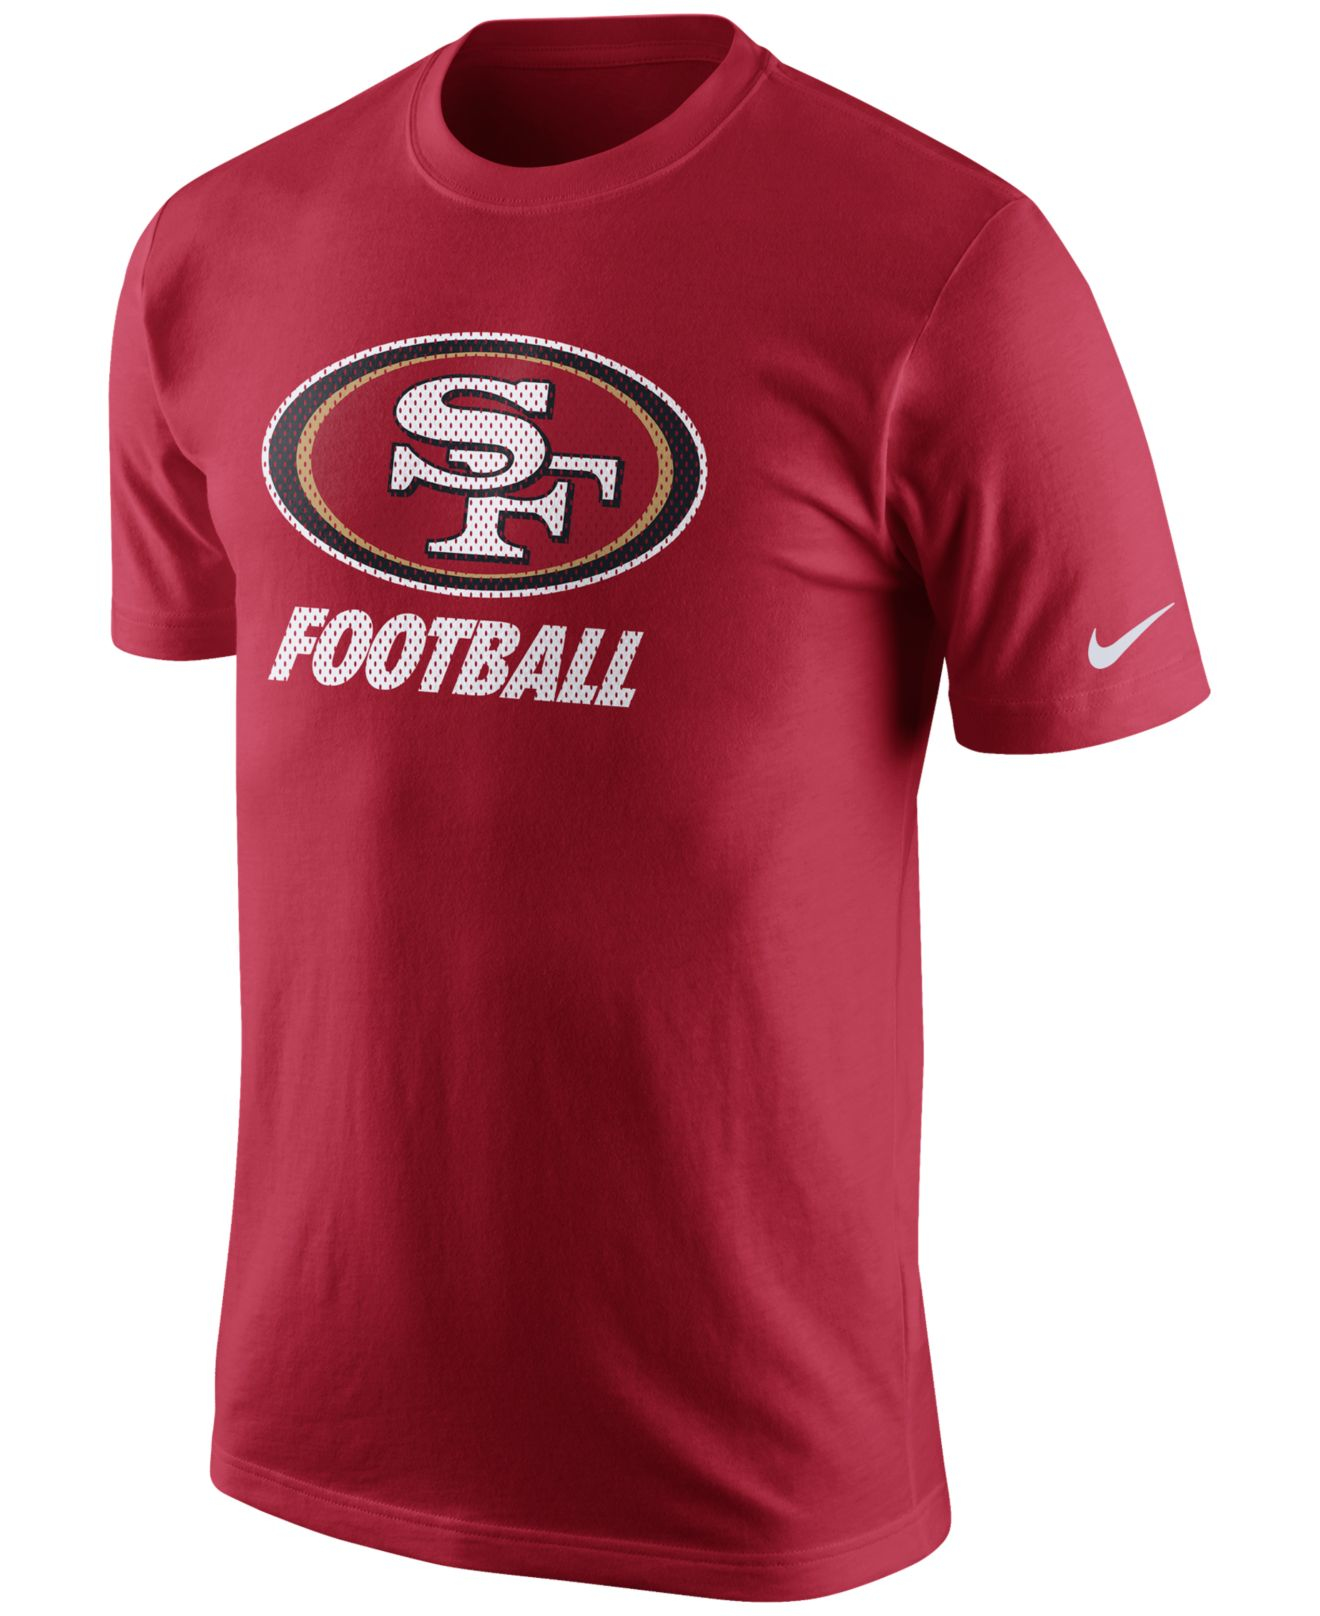 Lyst - Nike Men's San Francisco 49ers Facility T-shirt in Red for Men